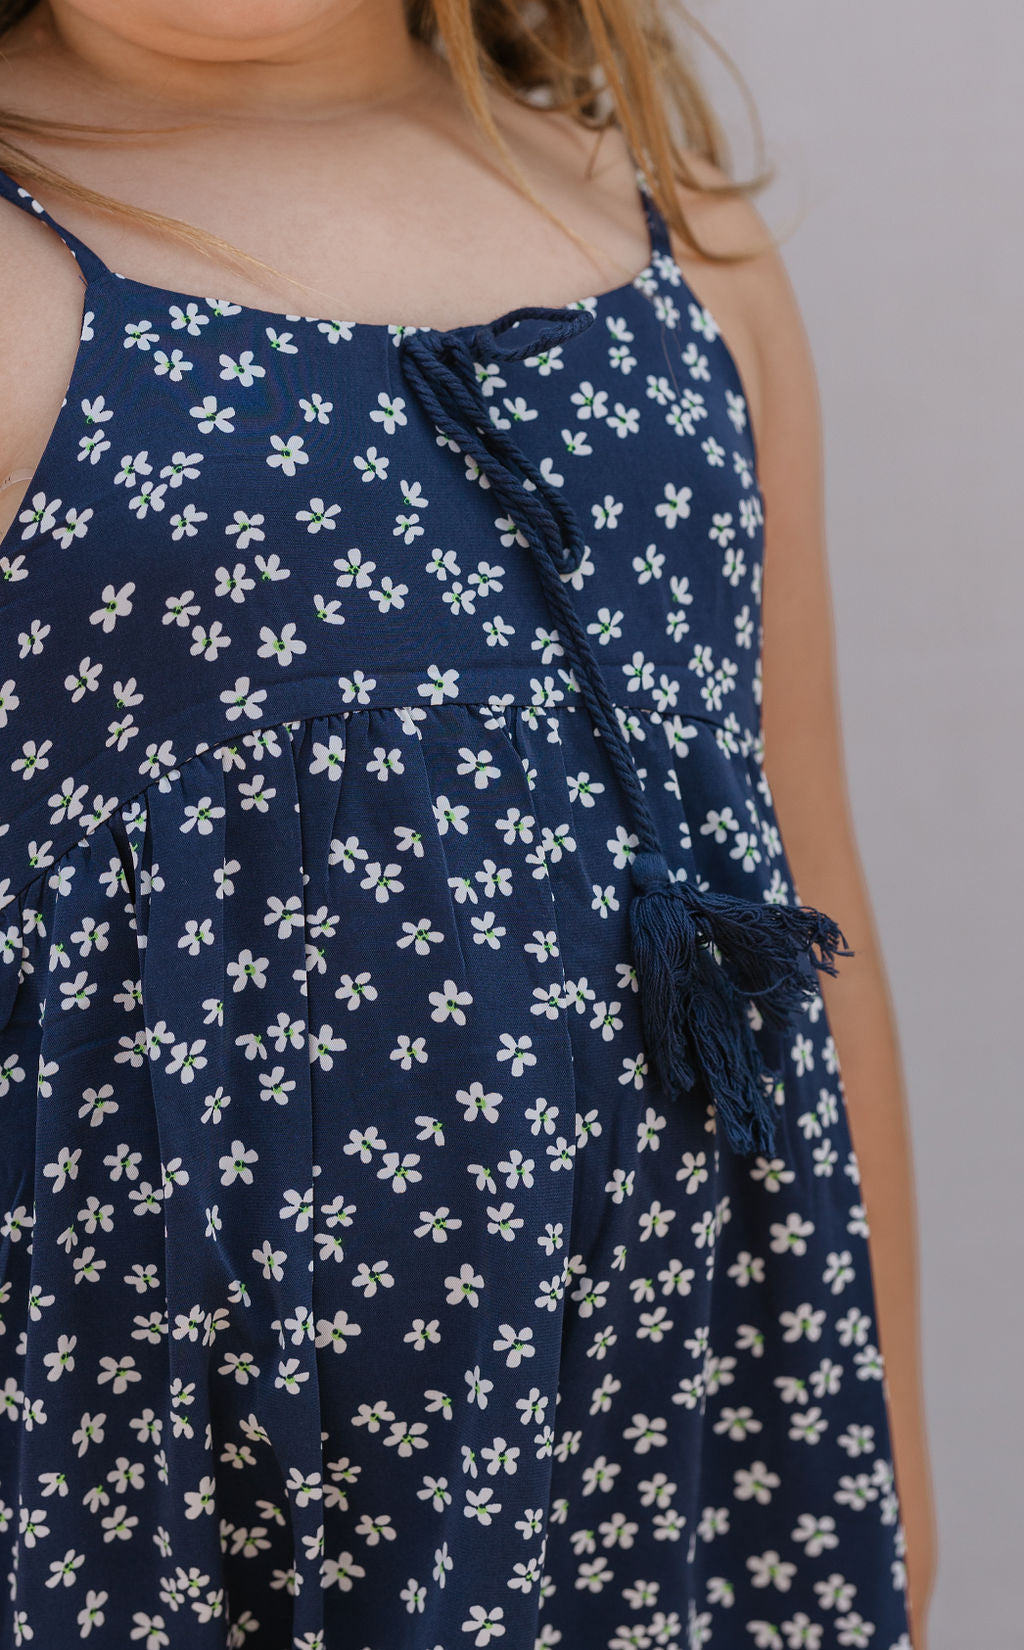 INDIE GIRLS NAVY WITH WHITE FLORAL SPAGHETTI STRAP DRESS